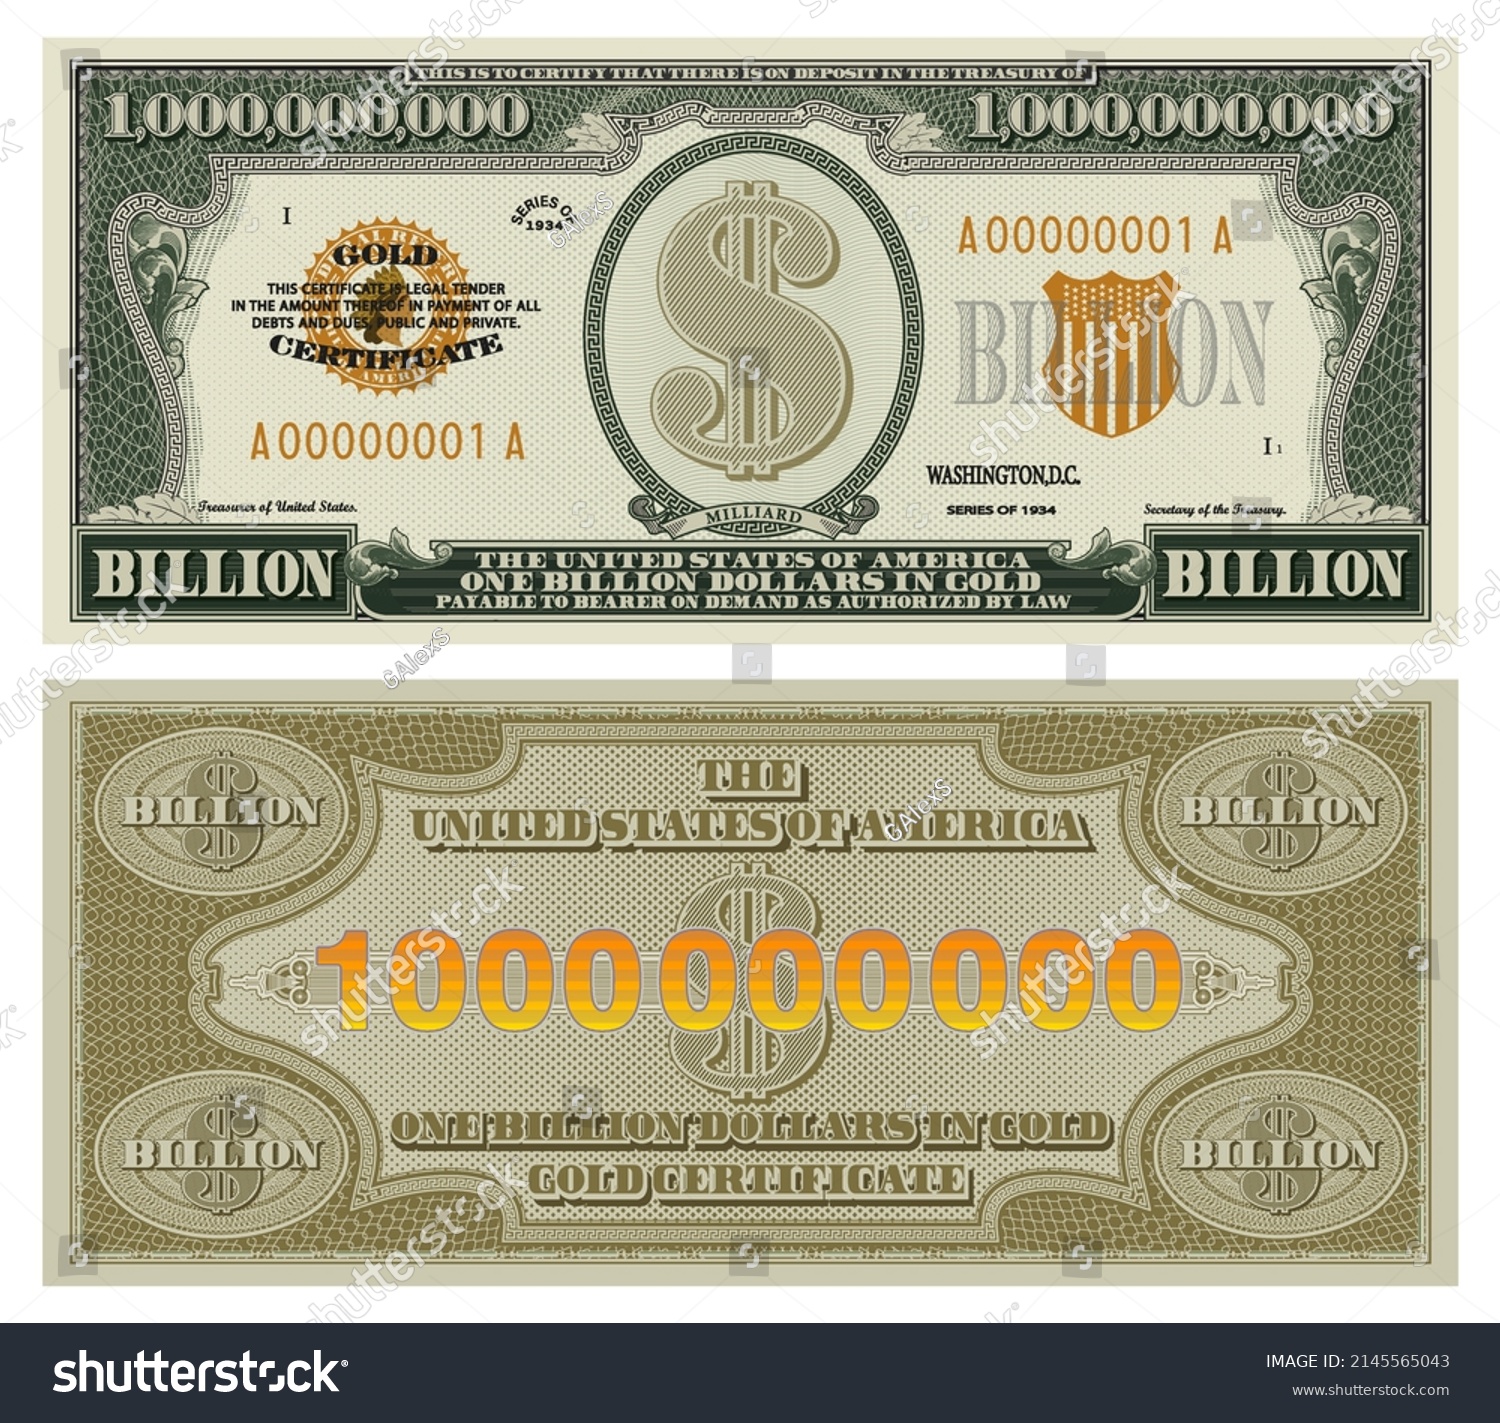 SVG of Fictional obverse and reverse of a one billion dollars gold certificate. Vintage paper money in USA style svg